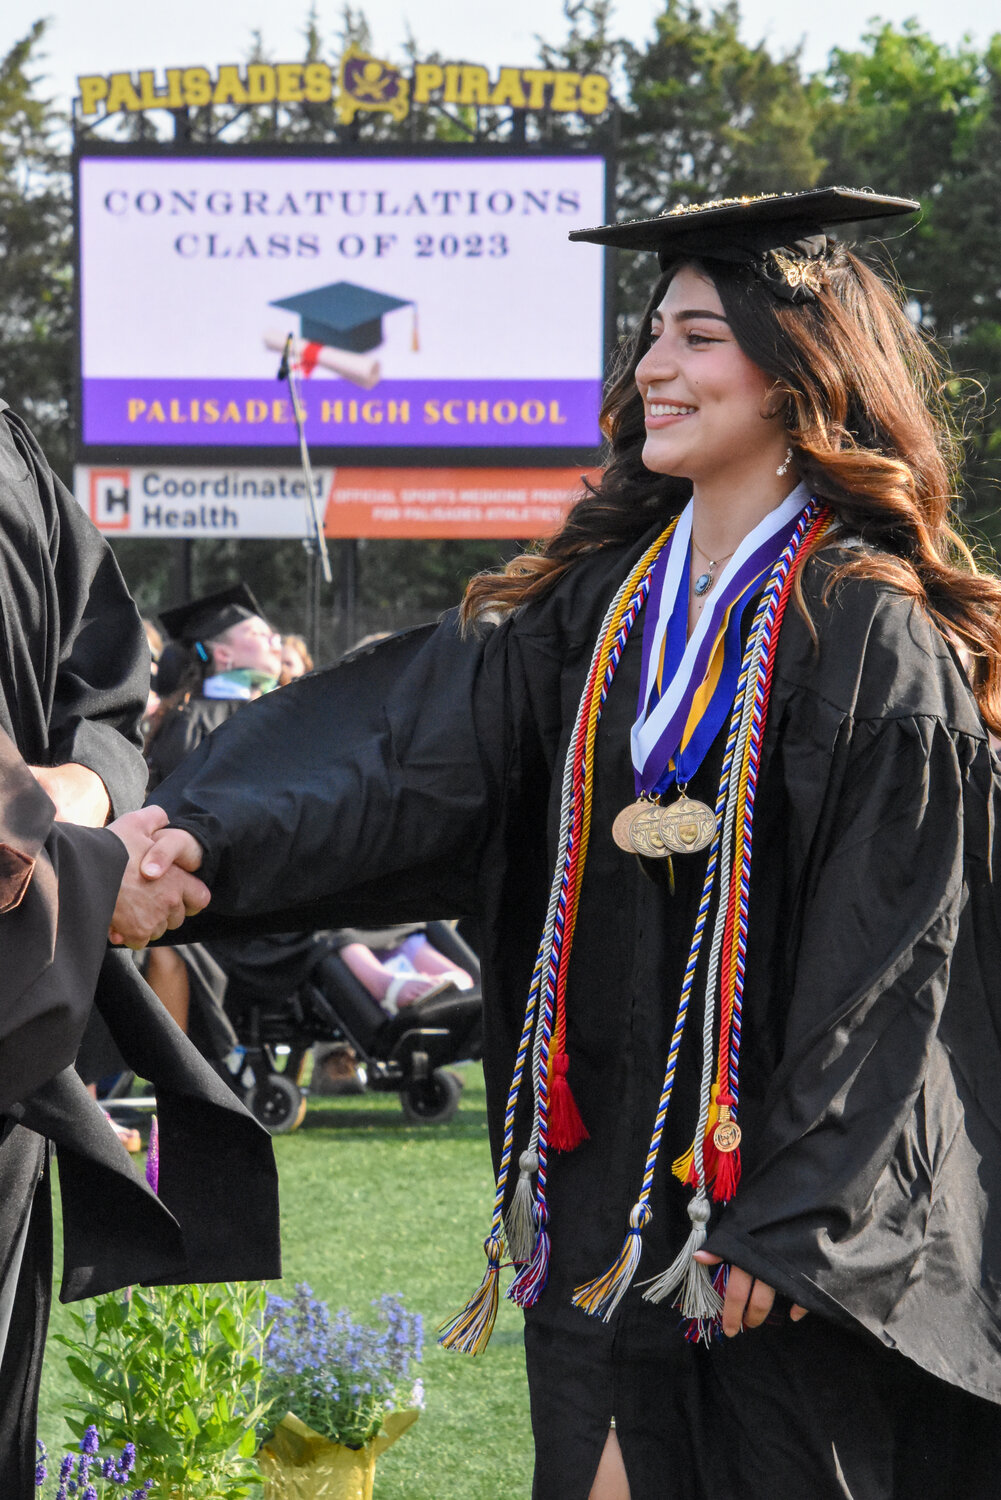 A member of the Palisades High School graduating class accepts a handshake upon picking up her diploma on June 2.